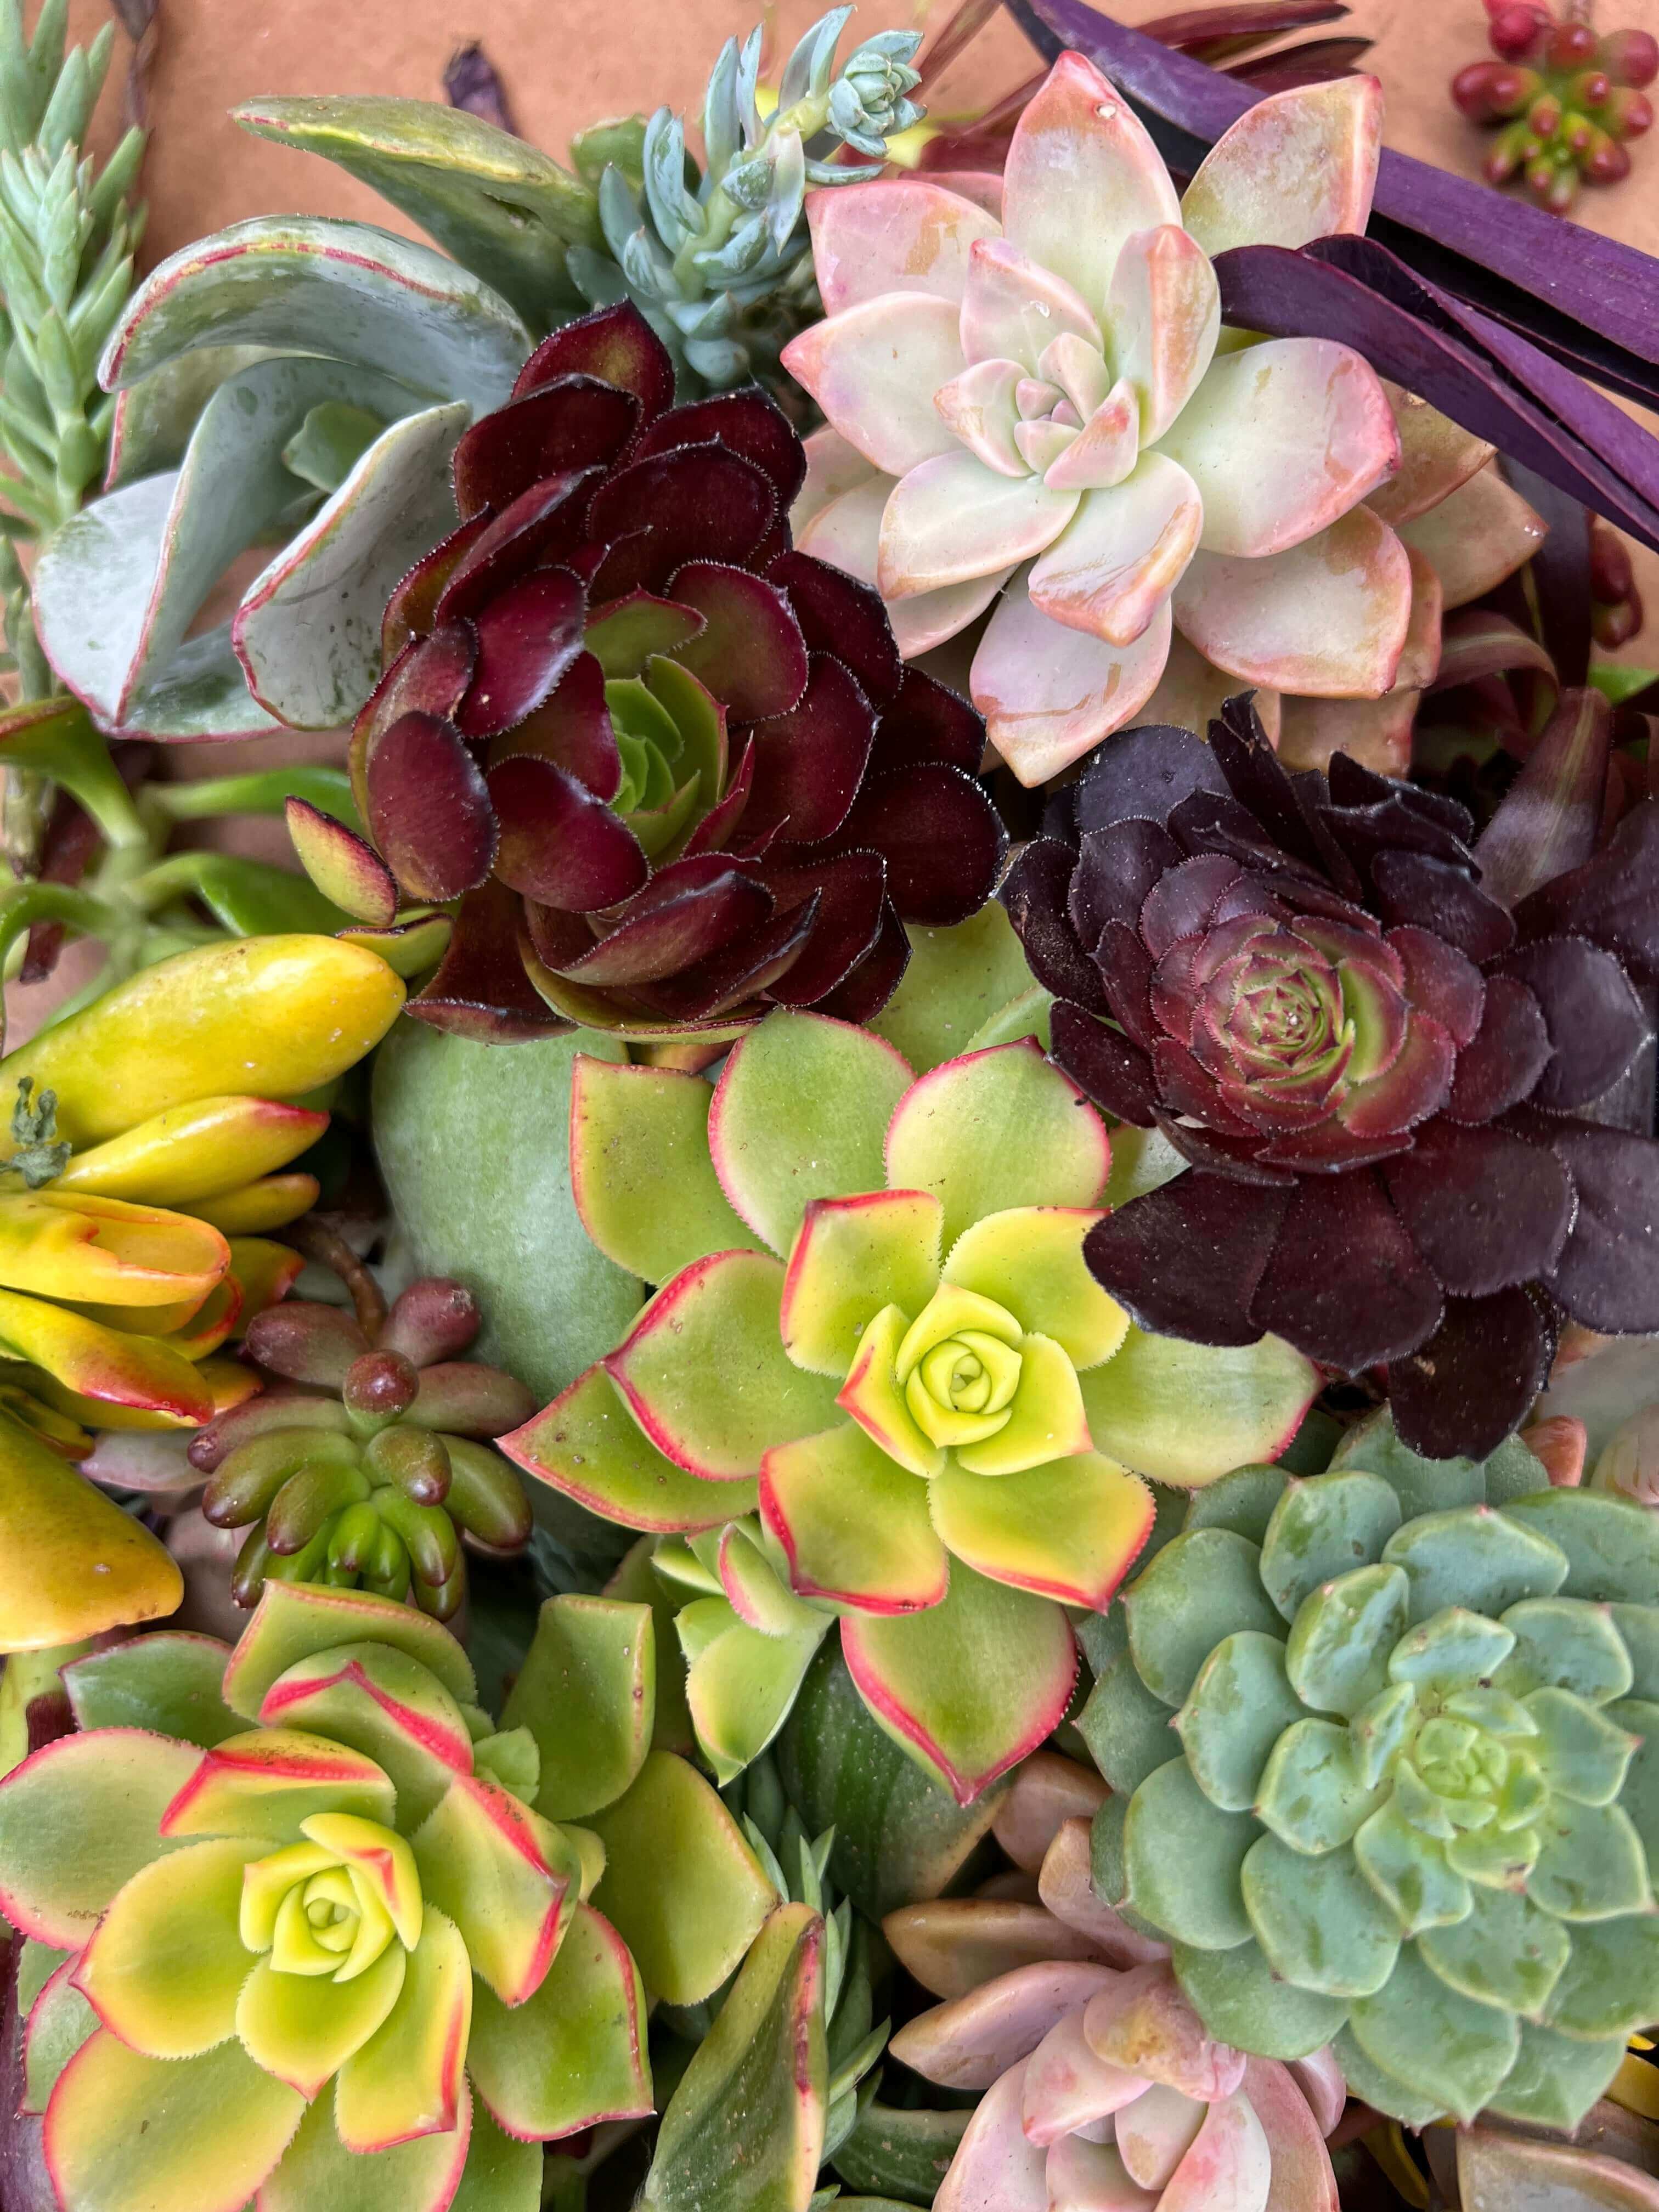 Collection of over sixty succulent cuttings in a close-up view, illustrating the ample selection and high quality of the plants.